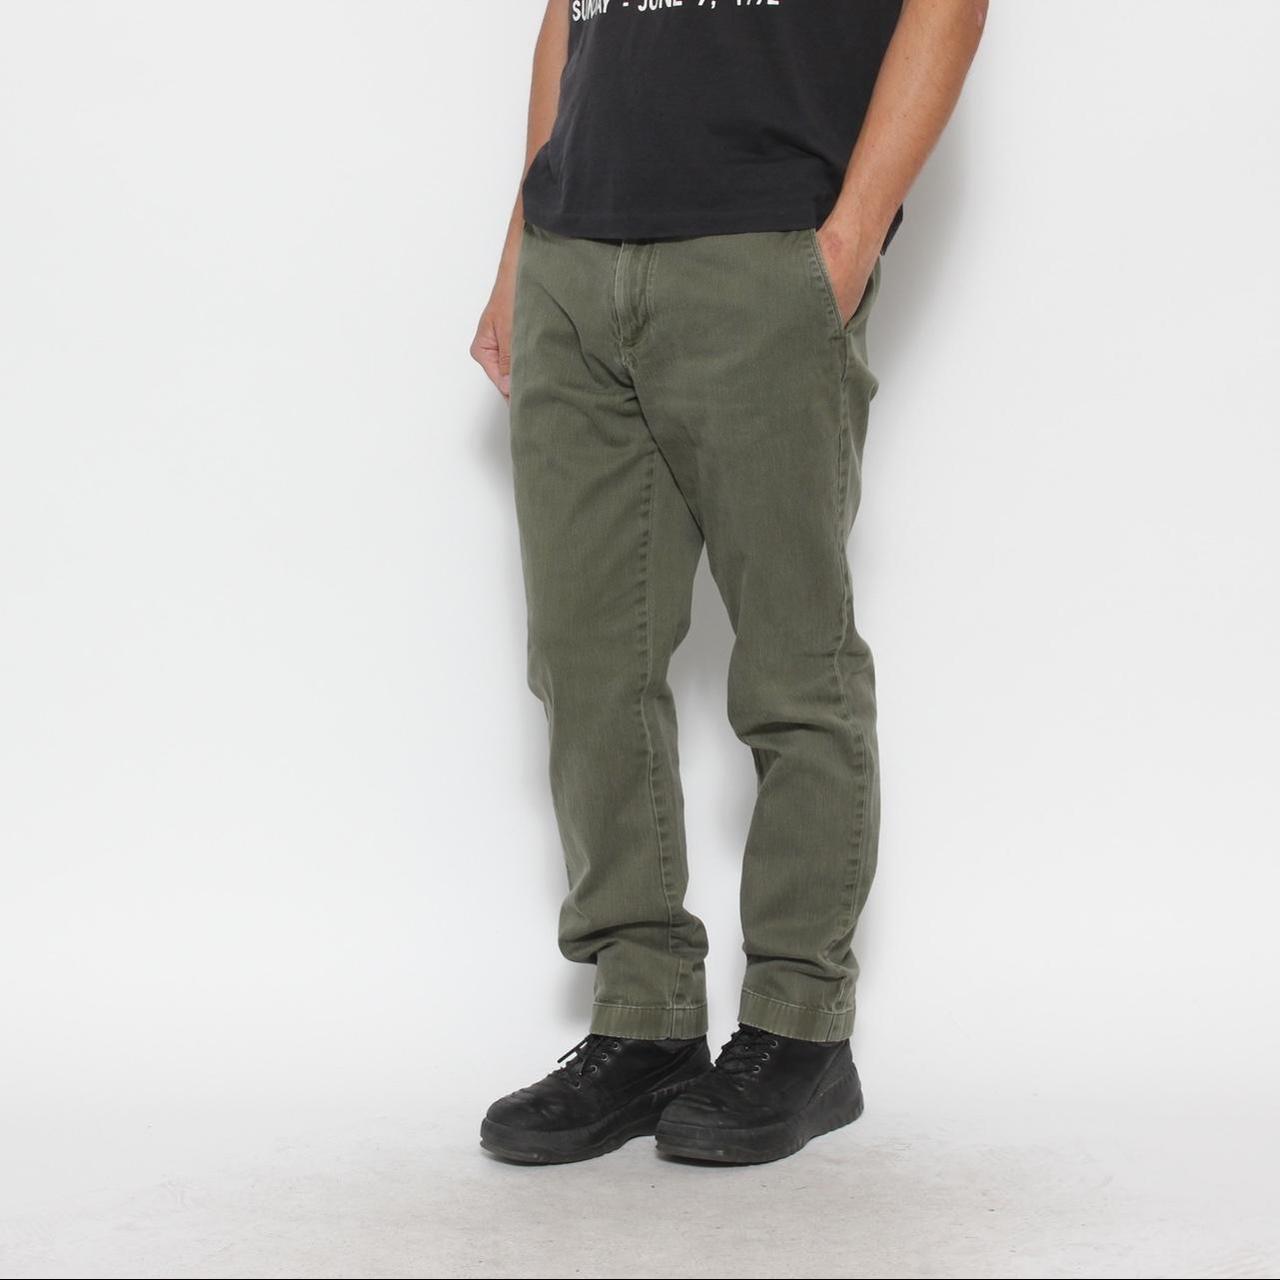 United Aviation Utility Faded Tactical Trousers Cargo Pants - Etsy Canada |  Tactical cargo pants, Cargo pants, Mens outfits